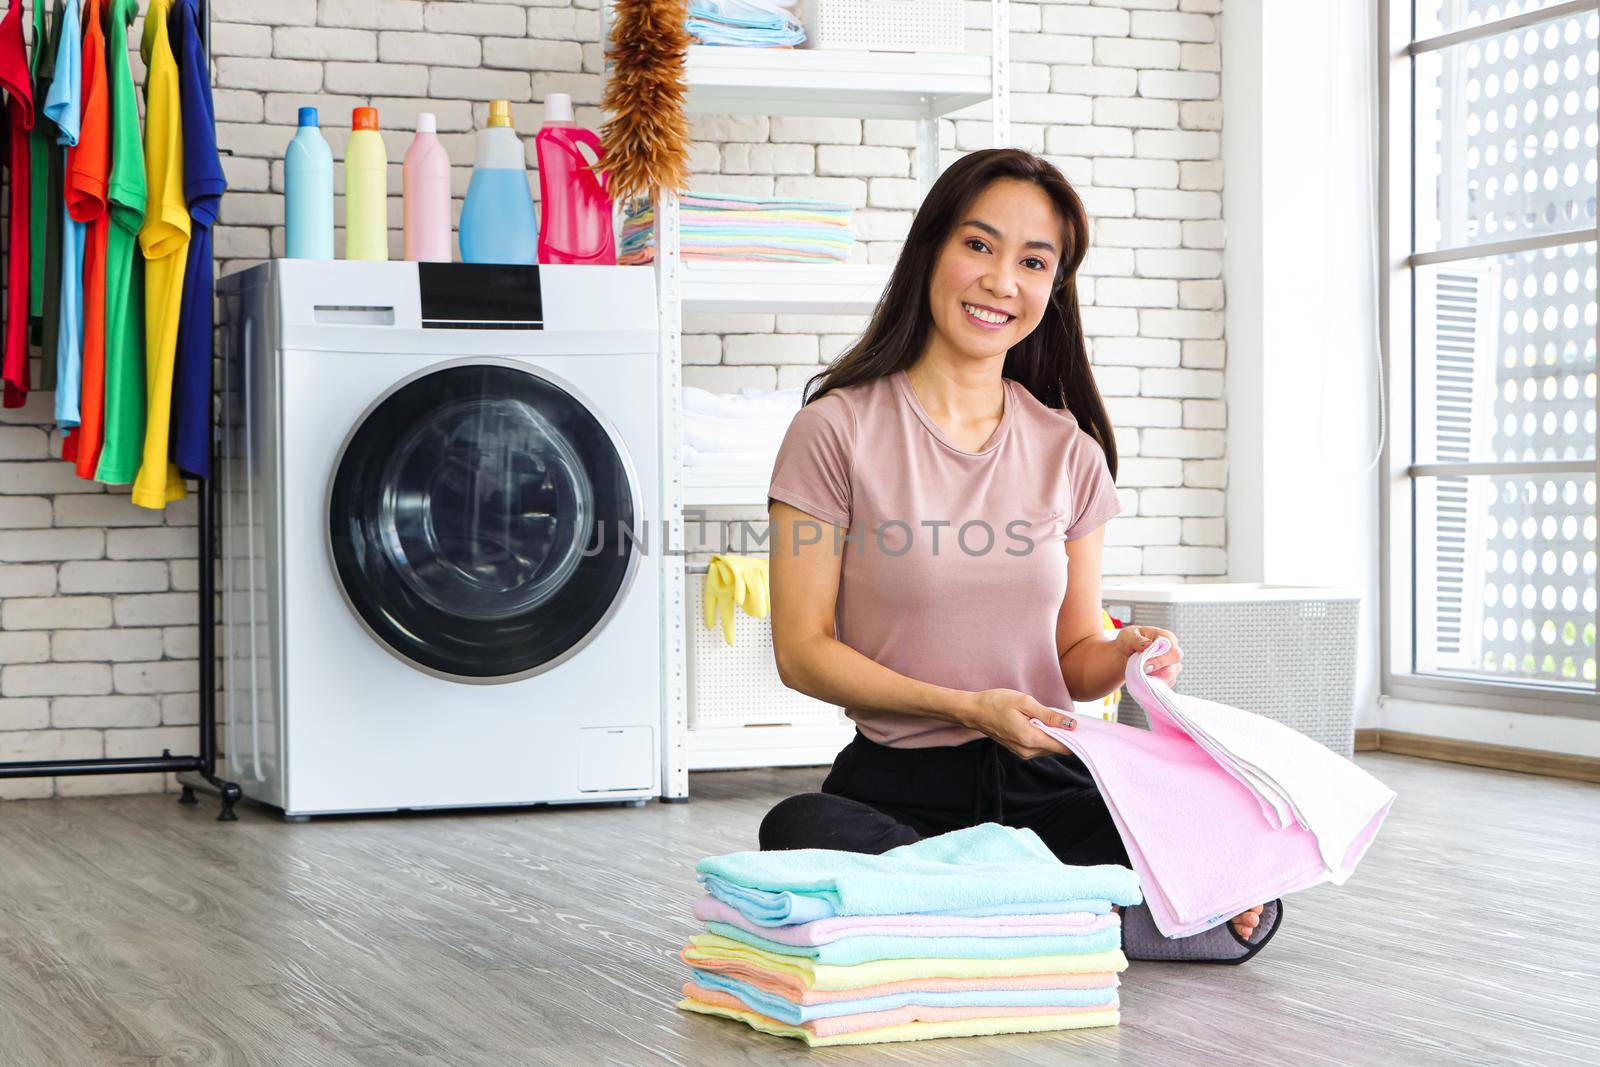 Asian woman sitting in the laundry room She picked up the folded laundry and checked the cleanliness after the washing machine finished. Smile and happiness